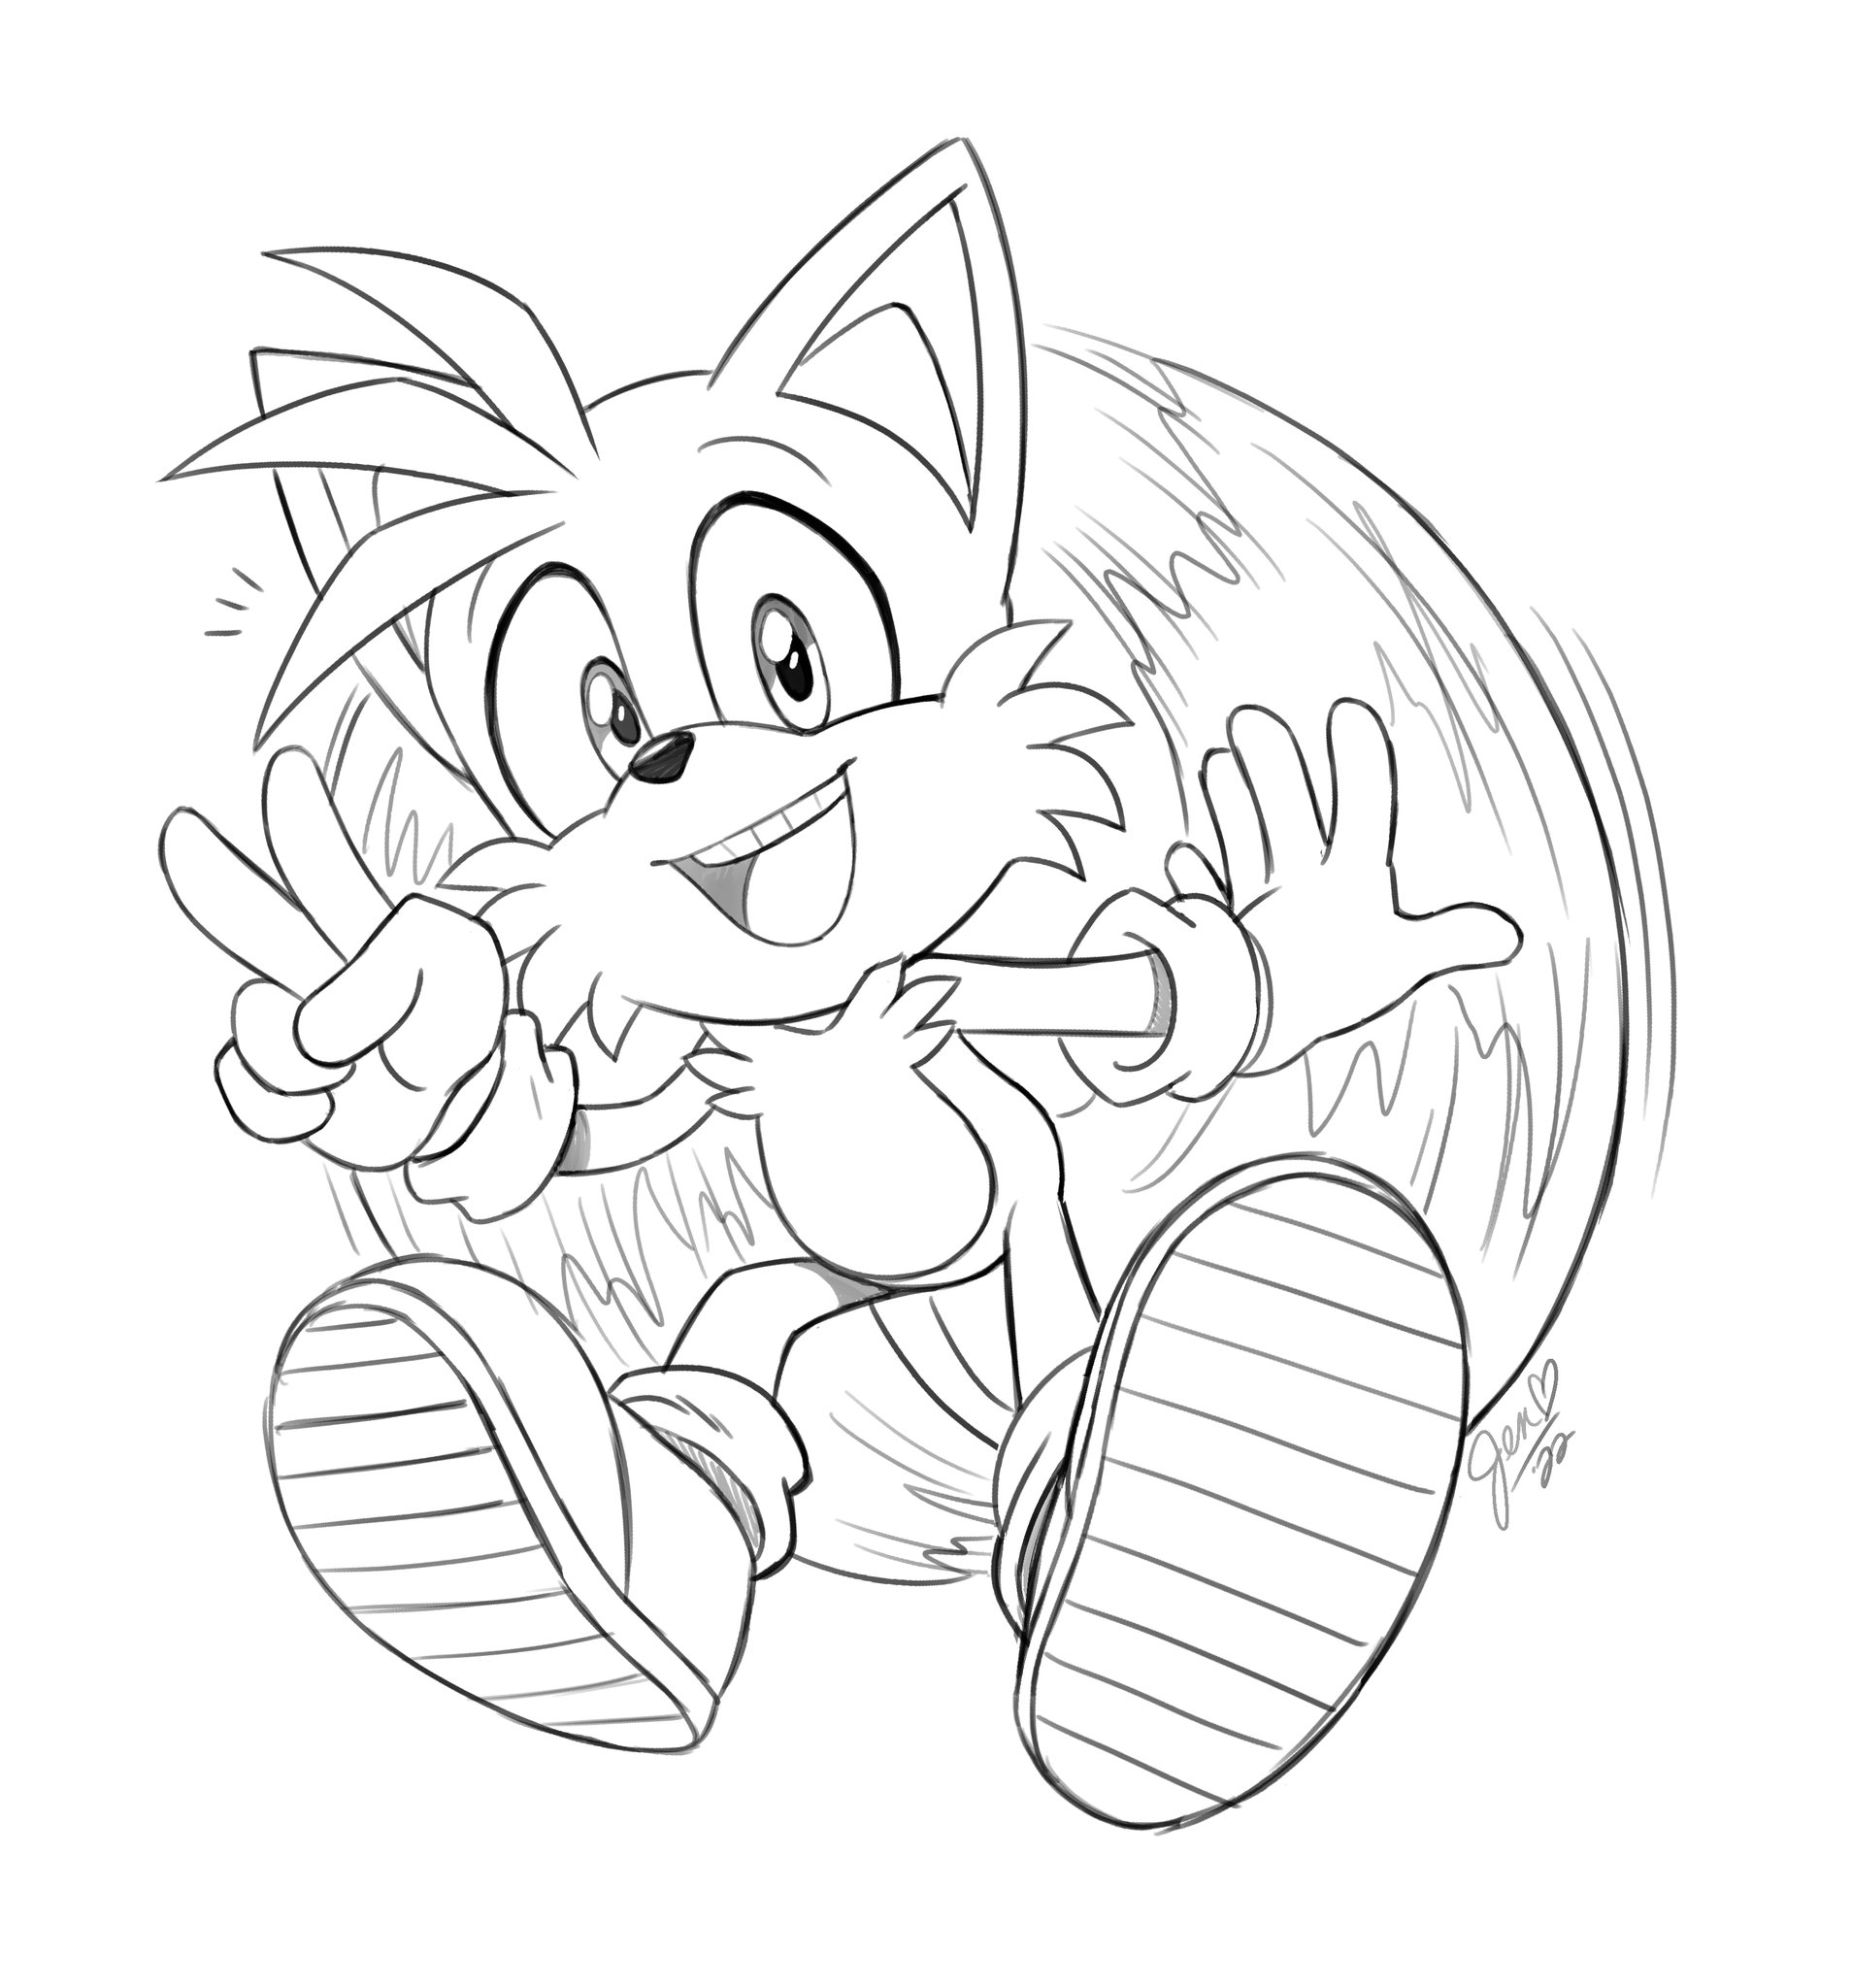 Jennifer hernandez on x i started doodling tails because it was but i didnt finish it in time for my time zone ð httpstcotescphte x